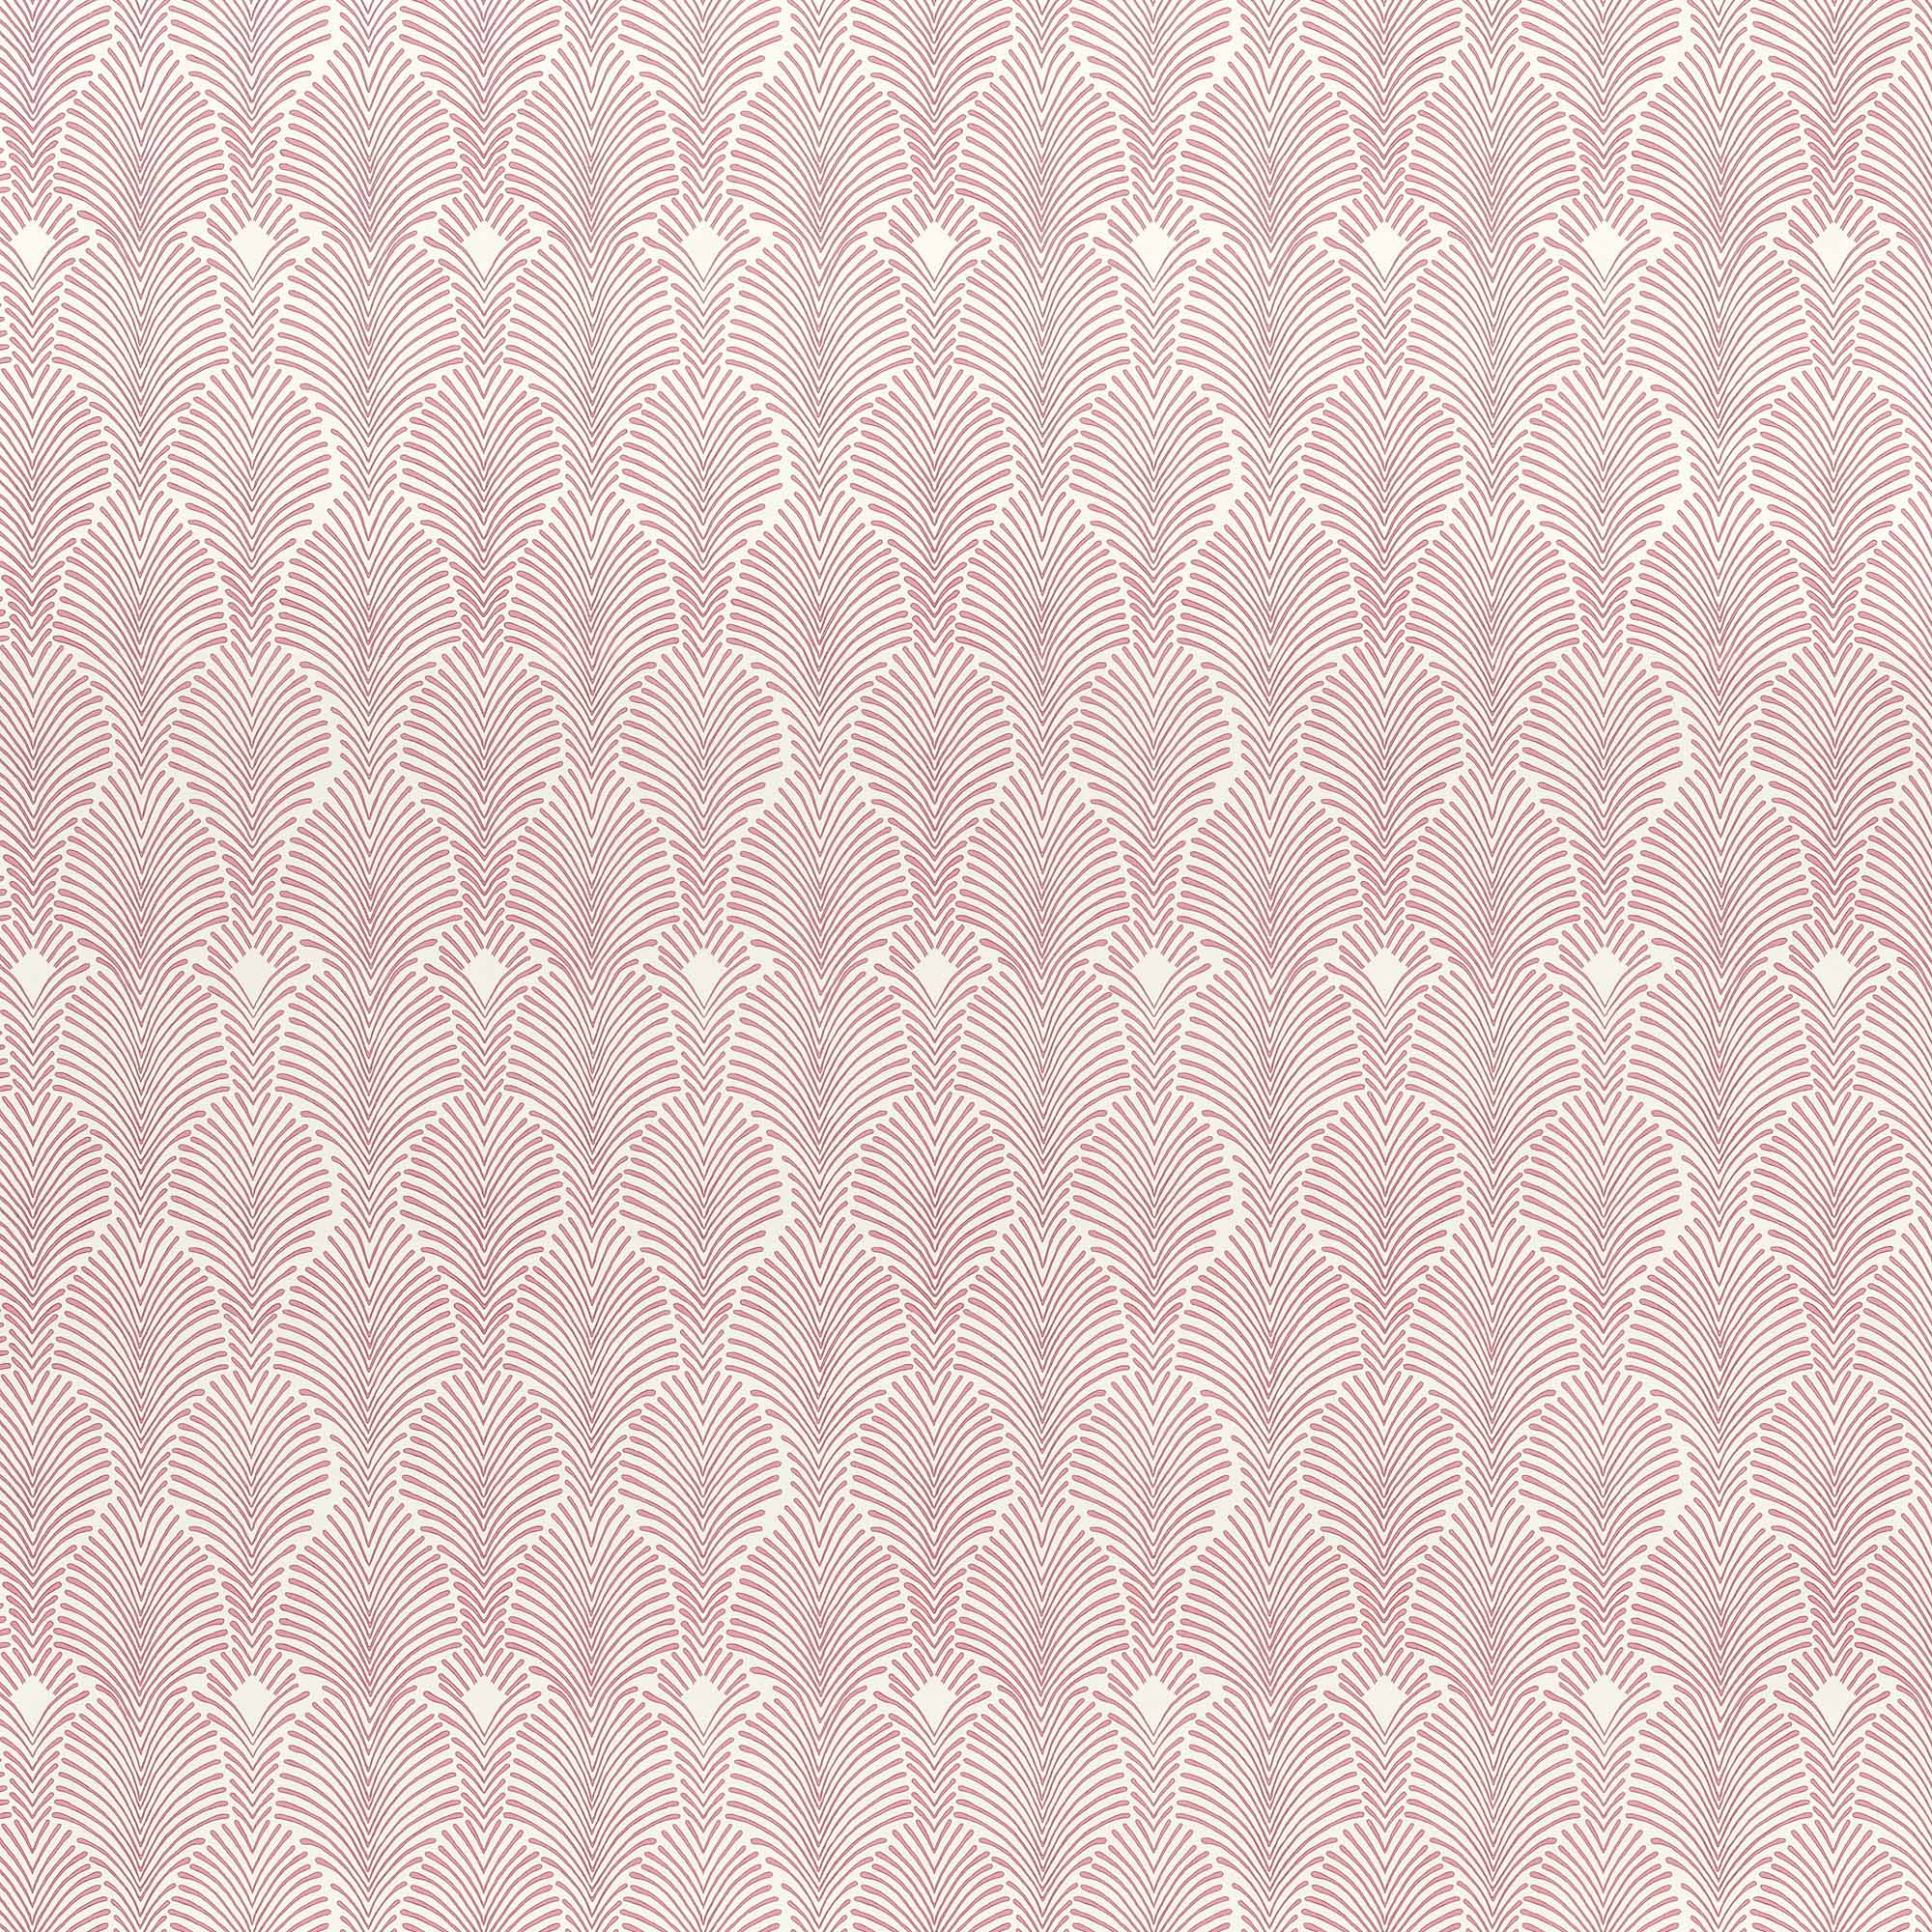 Detail of fabric in a striped damask pattern in pink on a cream field.